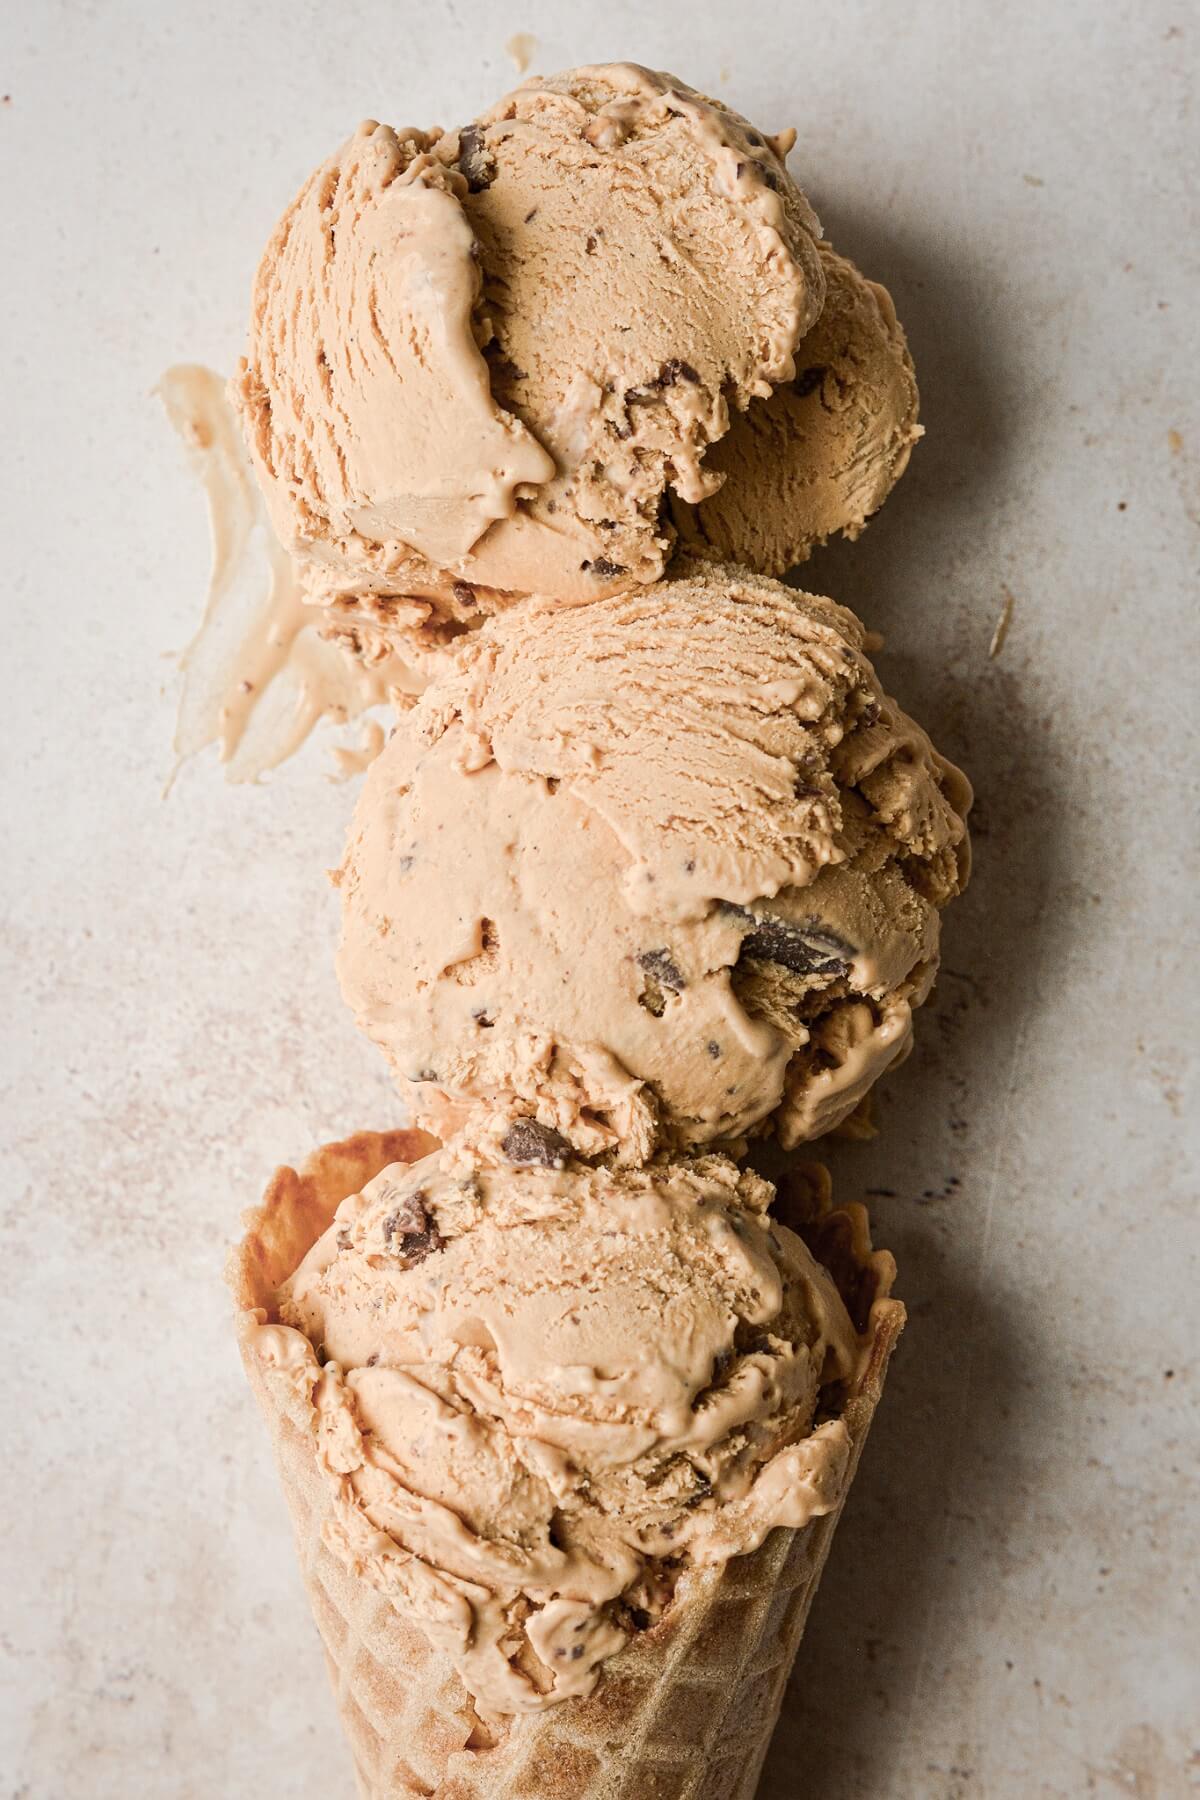 Scoops of no churn dulce de leche salted toffee ice cream in a waffle cone.